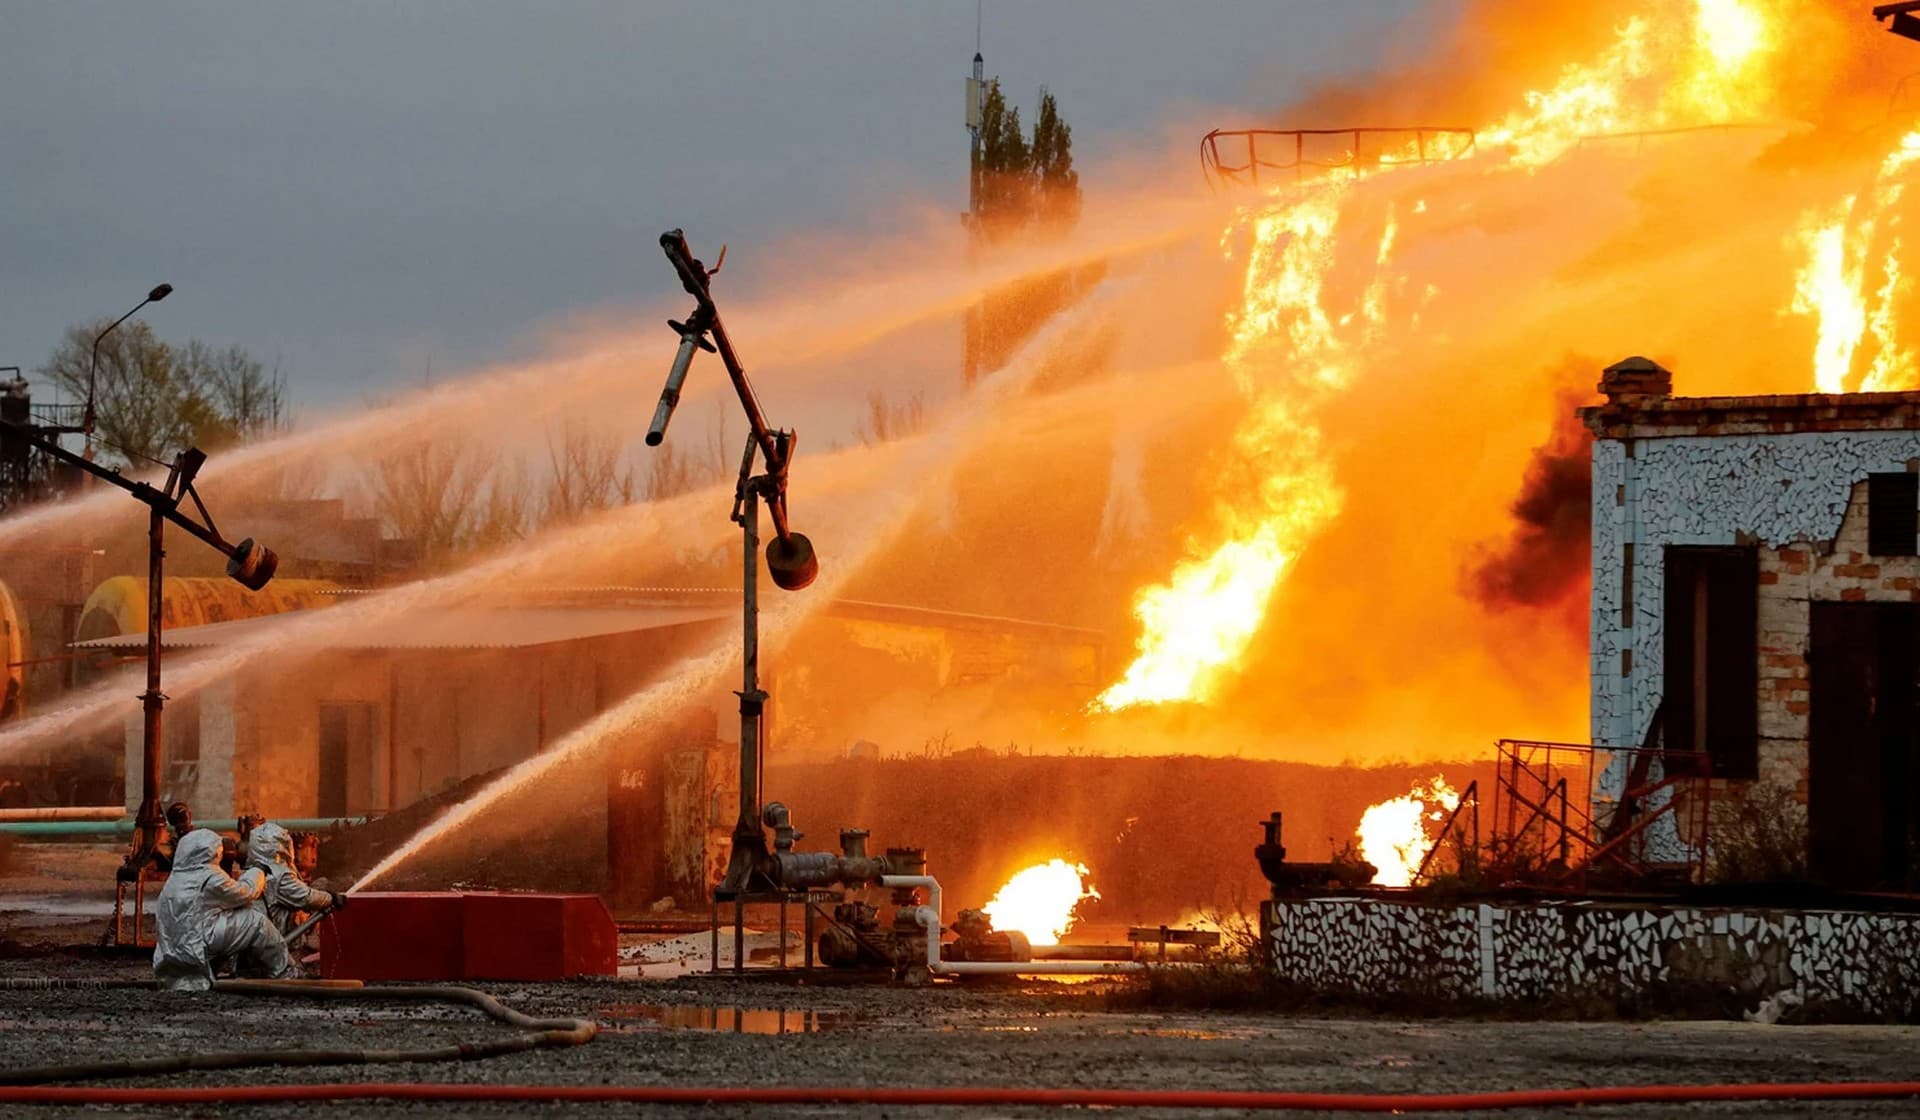 Firefighters work to extinguish fire following recent shelling at an oil storage facility in Shakhtarsk